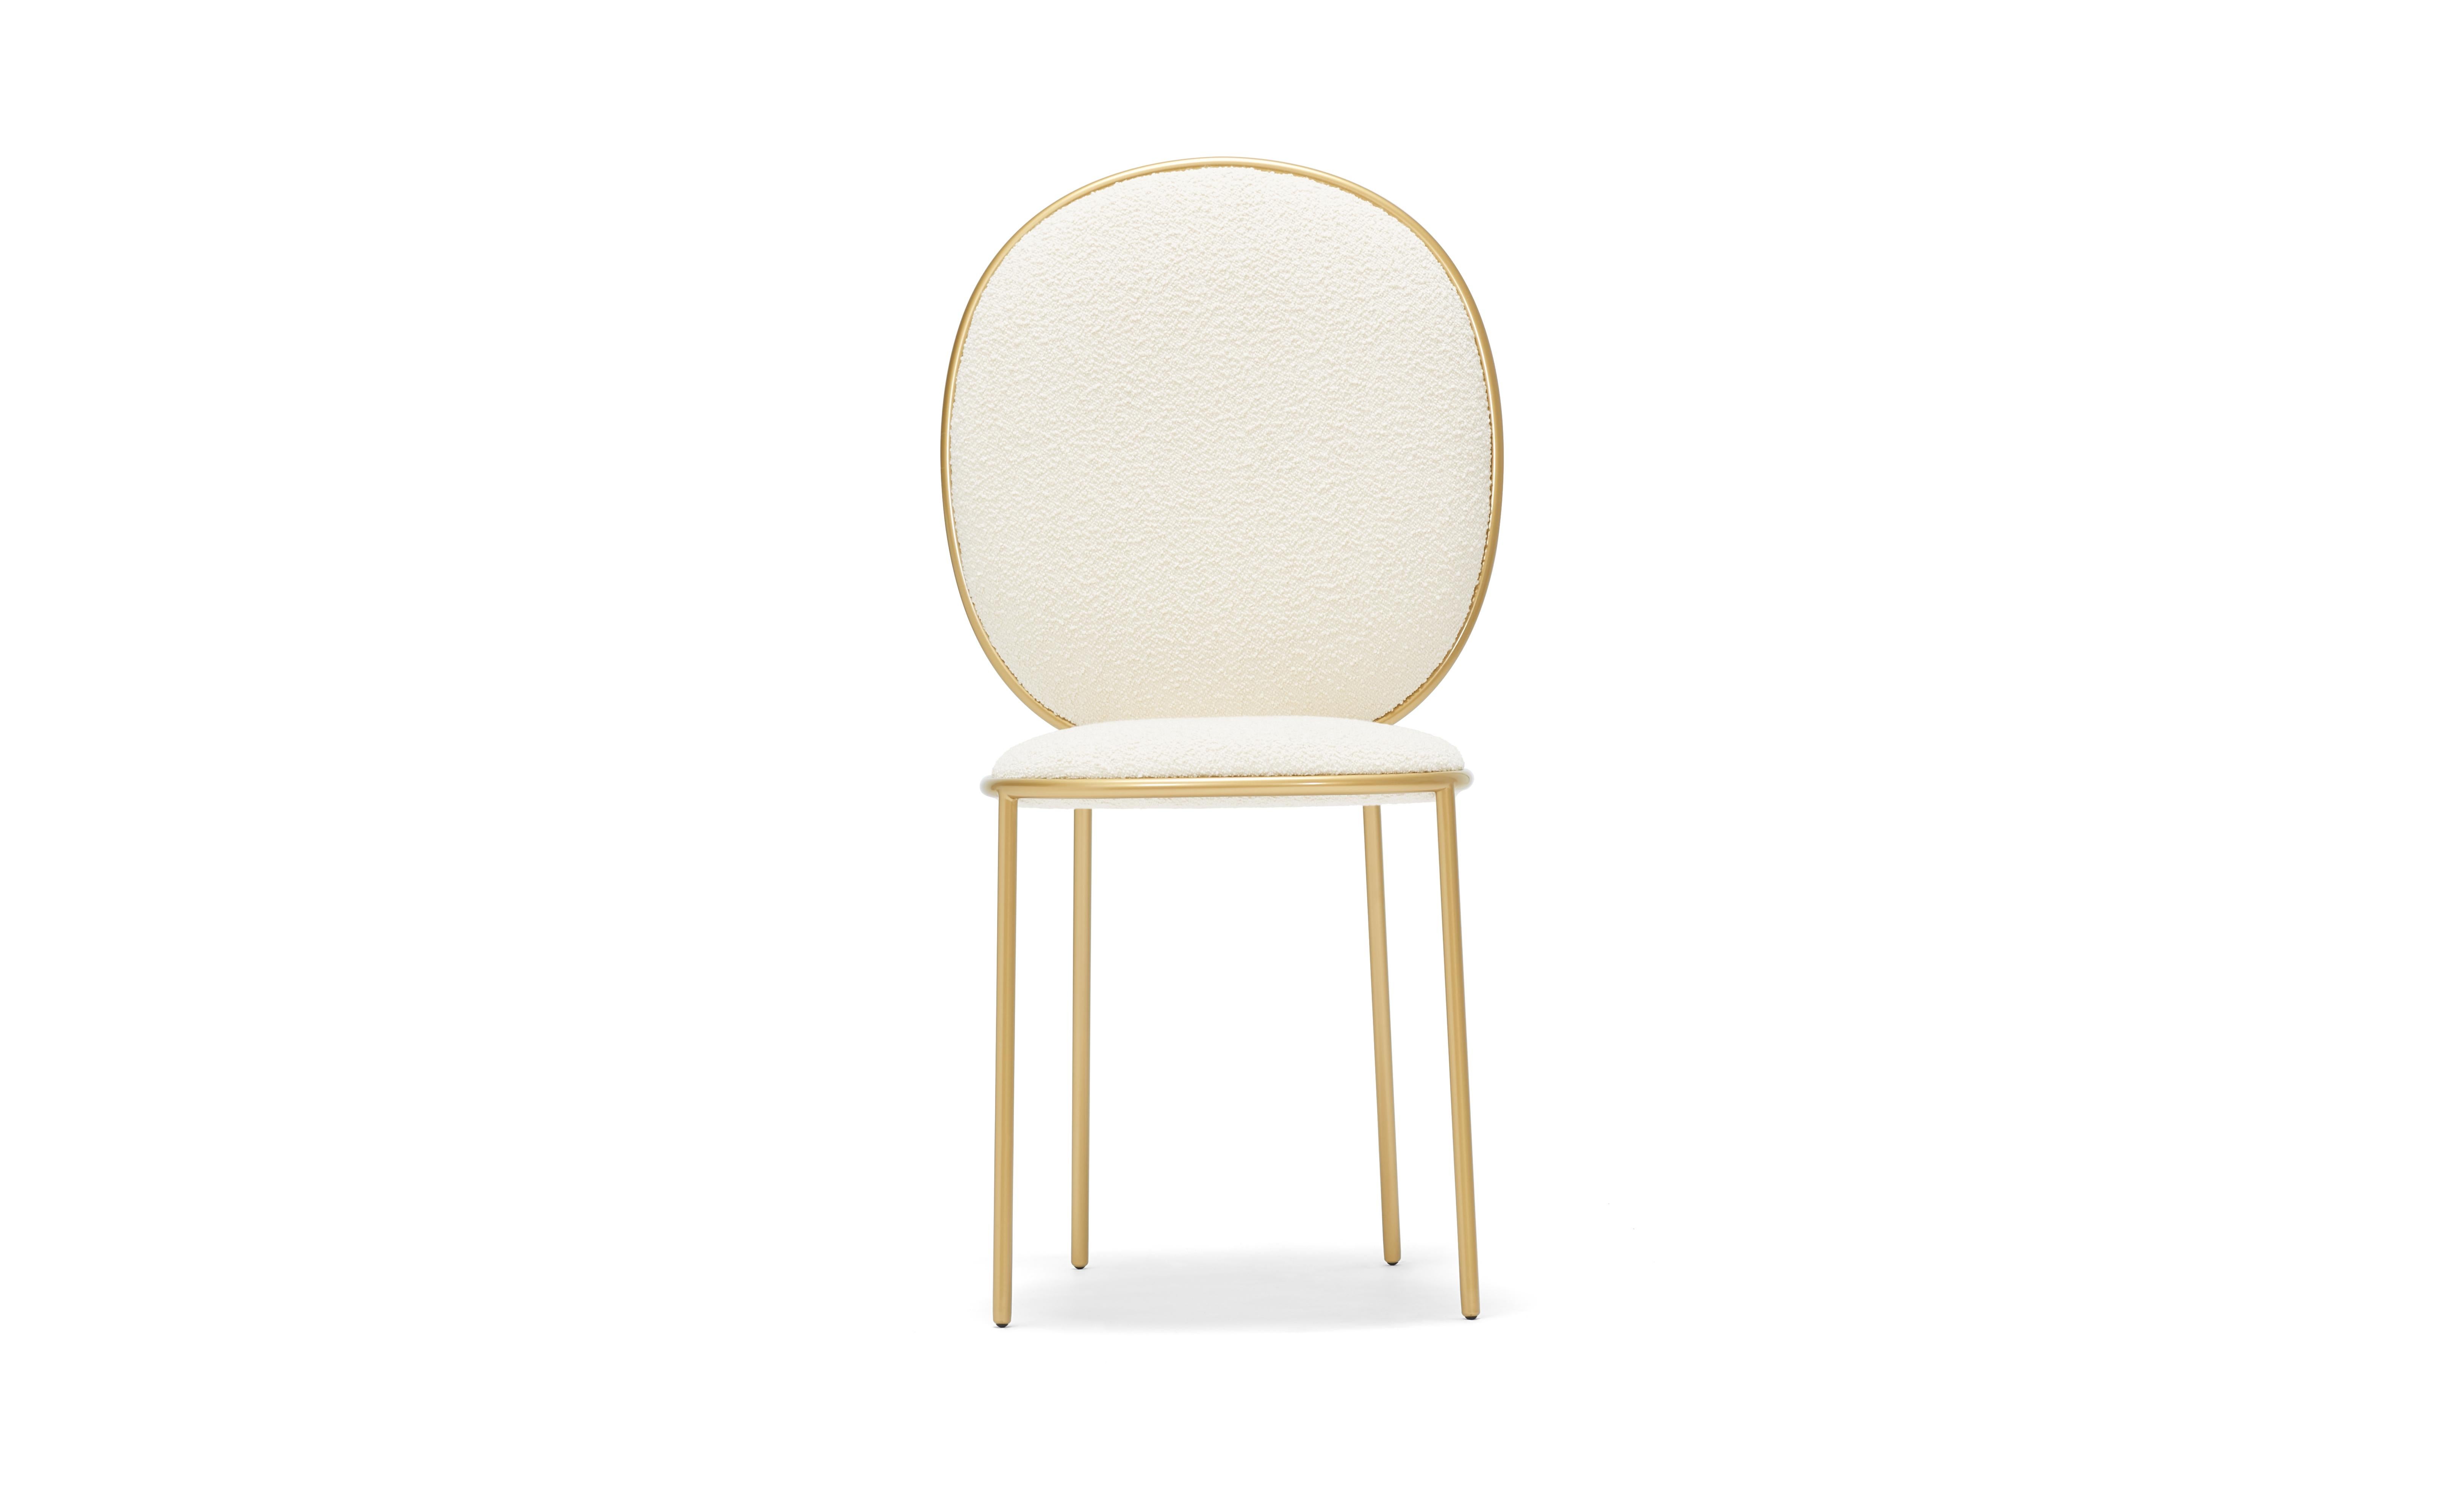 Contemporary ivory upholstered dining chair - Stay by Nika Zupanc

The Stay Family turns everyday seating into a special occasion. The Dining Chair and Dining Armchair are variations on an elegant social theme whilst the Dining Table adds a